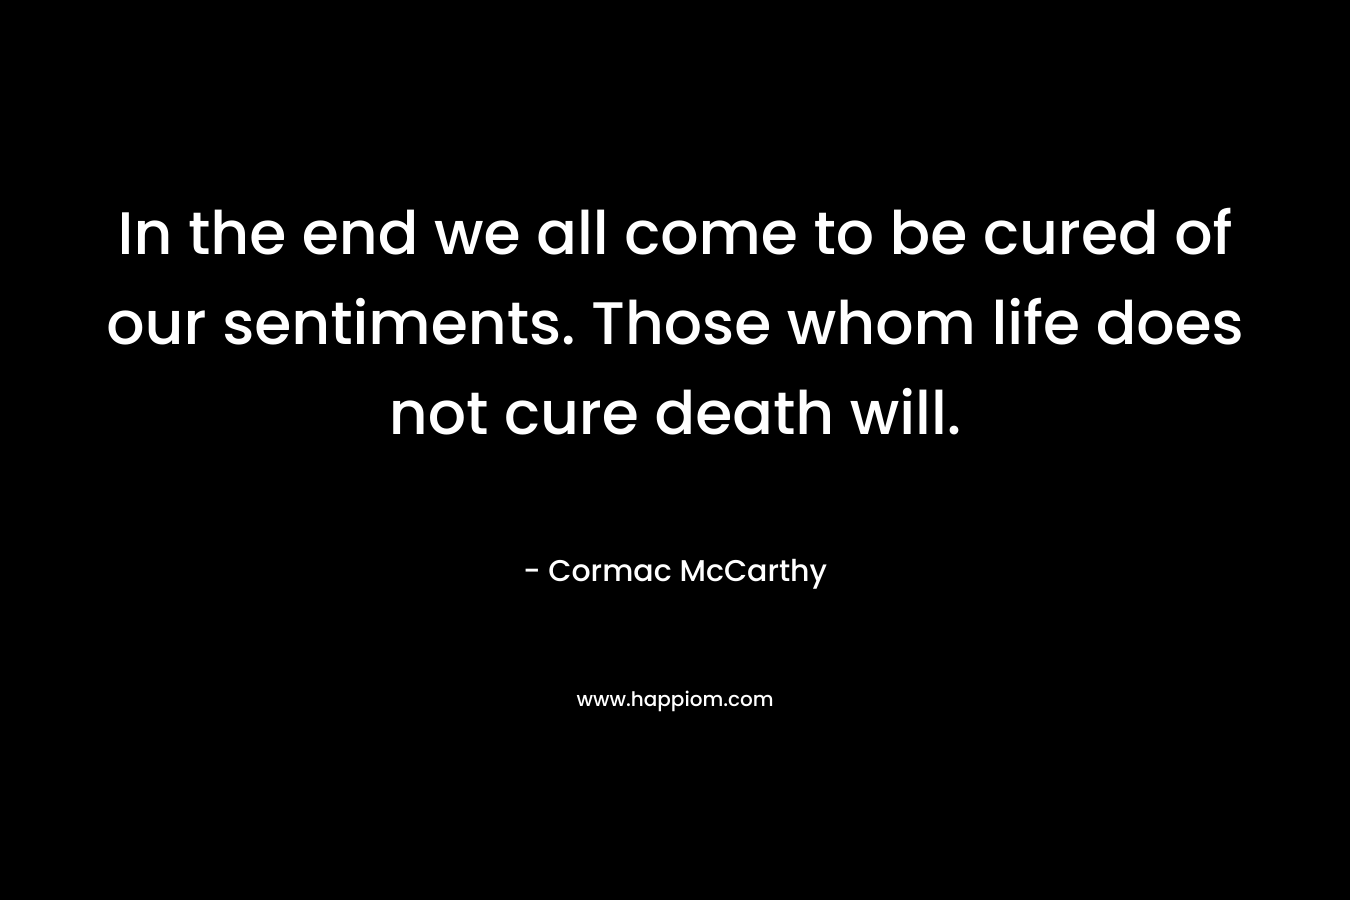 In the end we all come to be cured of our sentiments. Those whom life does not cure death will.